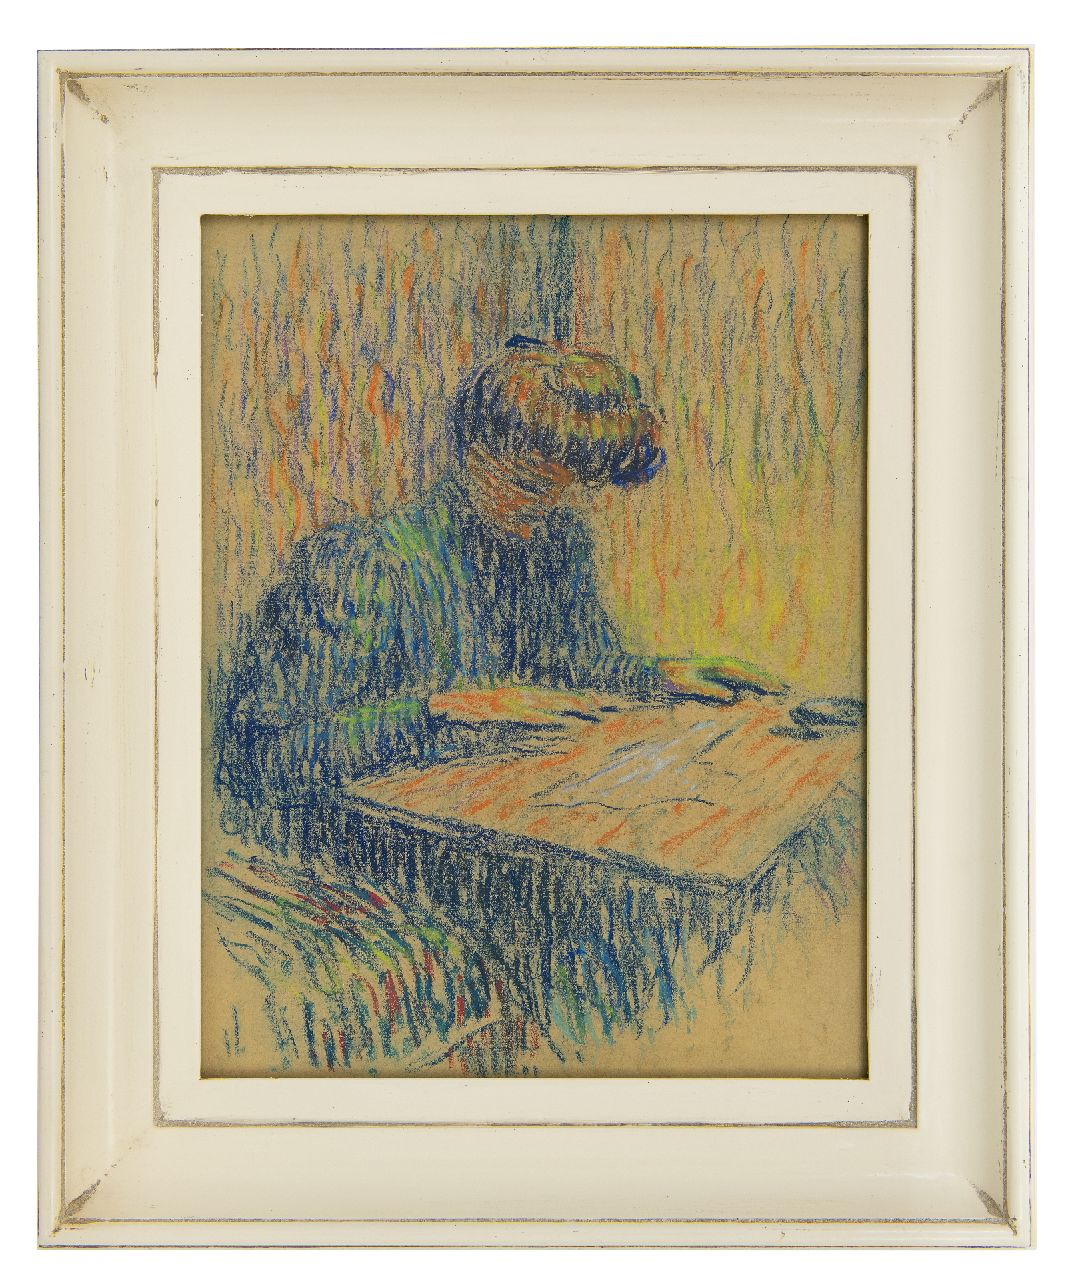 Jouhaud L.  | Léon Jouhaud | Watercolours and drawings offered for sale | The embroidery, chalk on paper 32.3 x 24.8 cm, signed l.r. monogram and painted in 1909